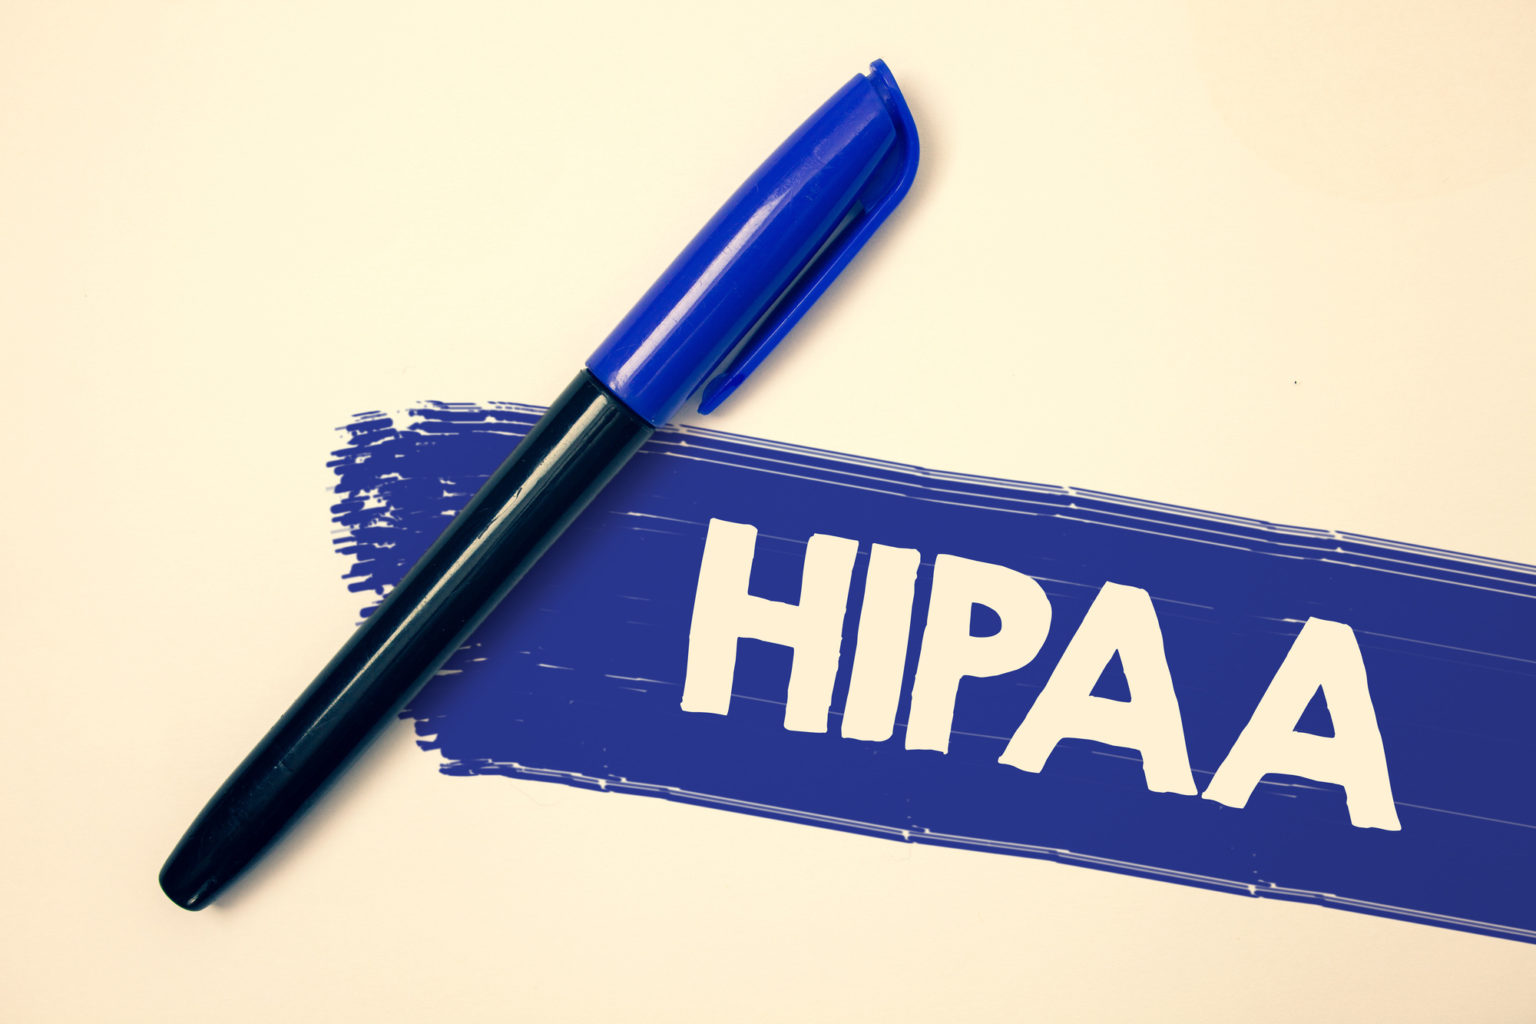 7 Things You Need To Know Before Getting Your HIPAA Certification